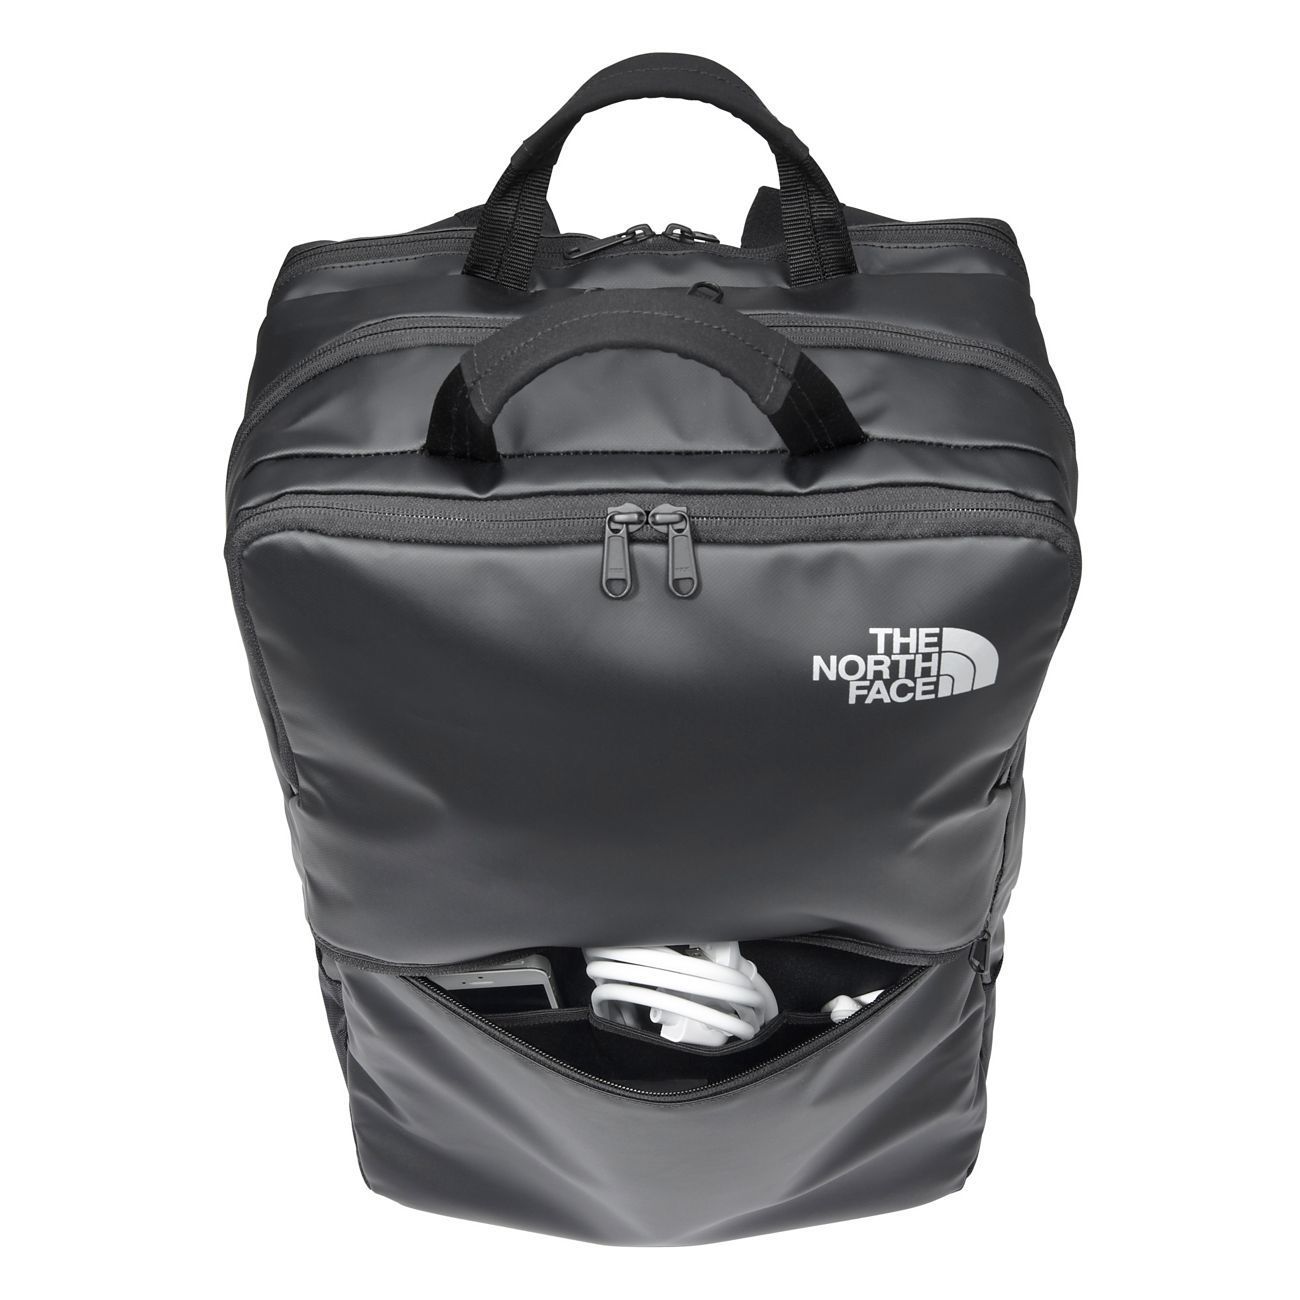 The North Face BITE 25 Bag. Backpack for Apple Gadgets.